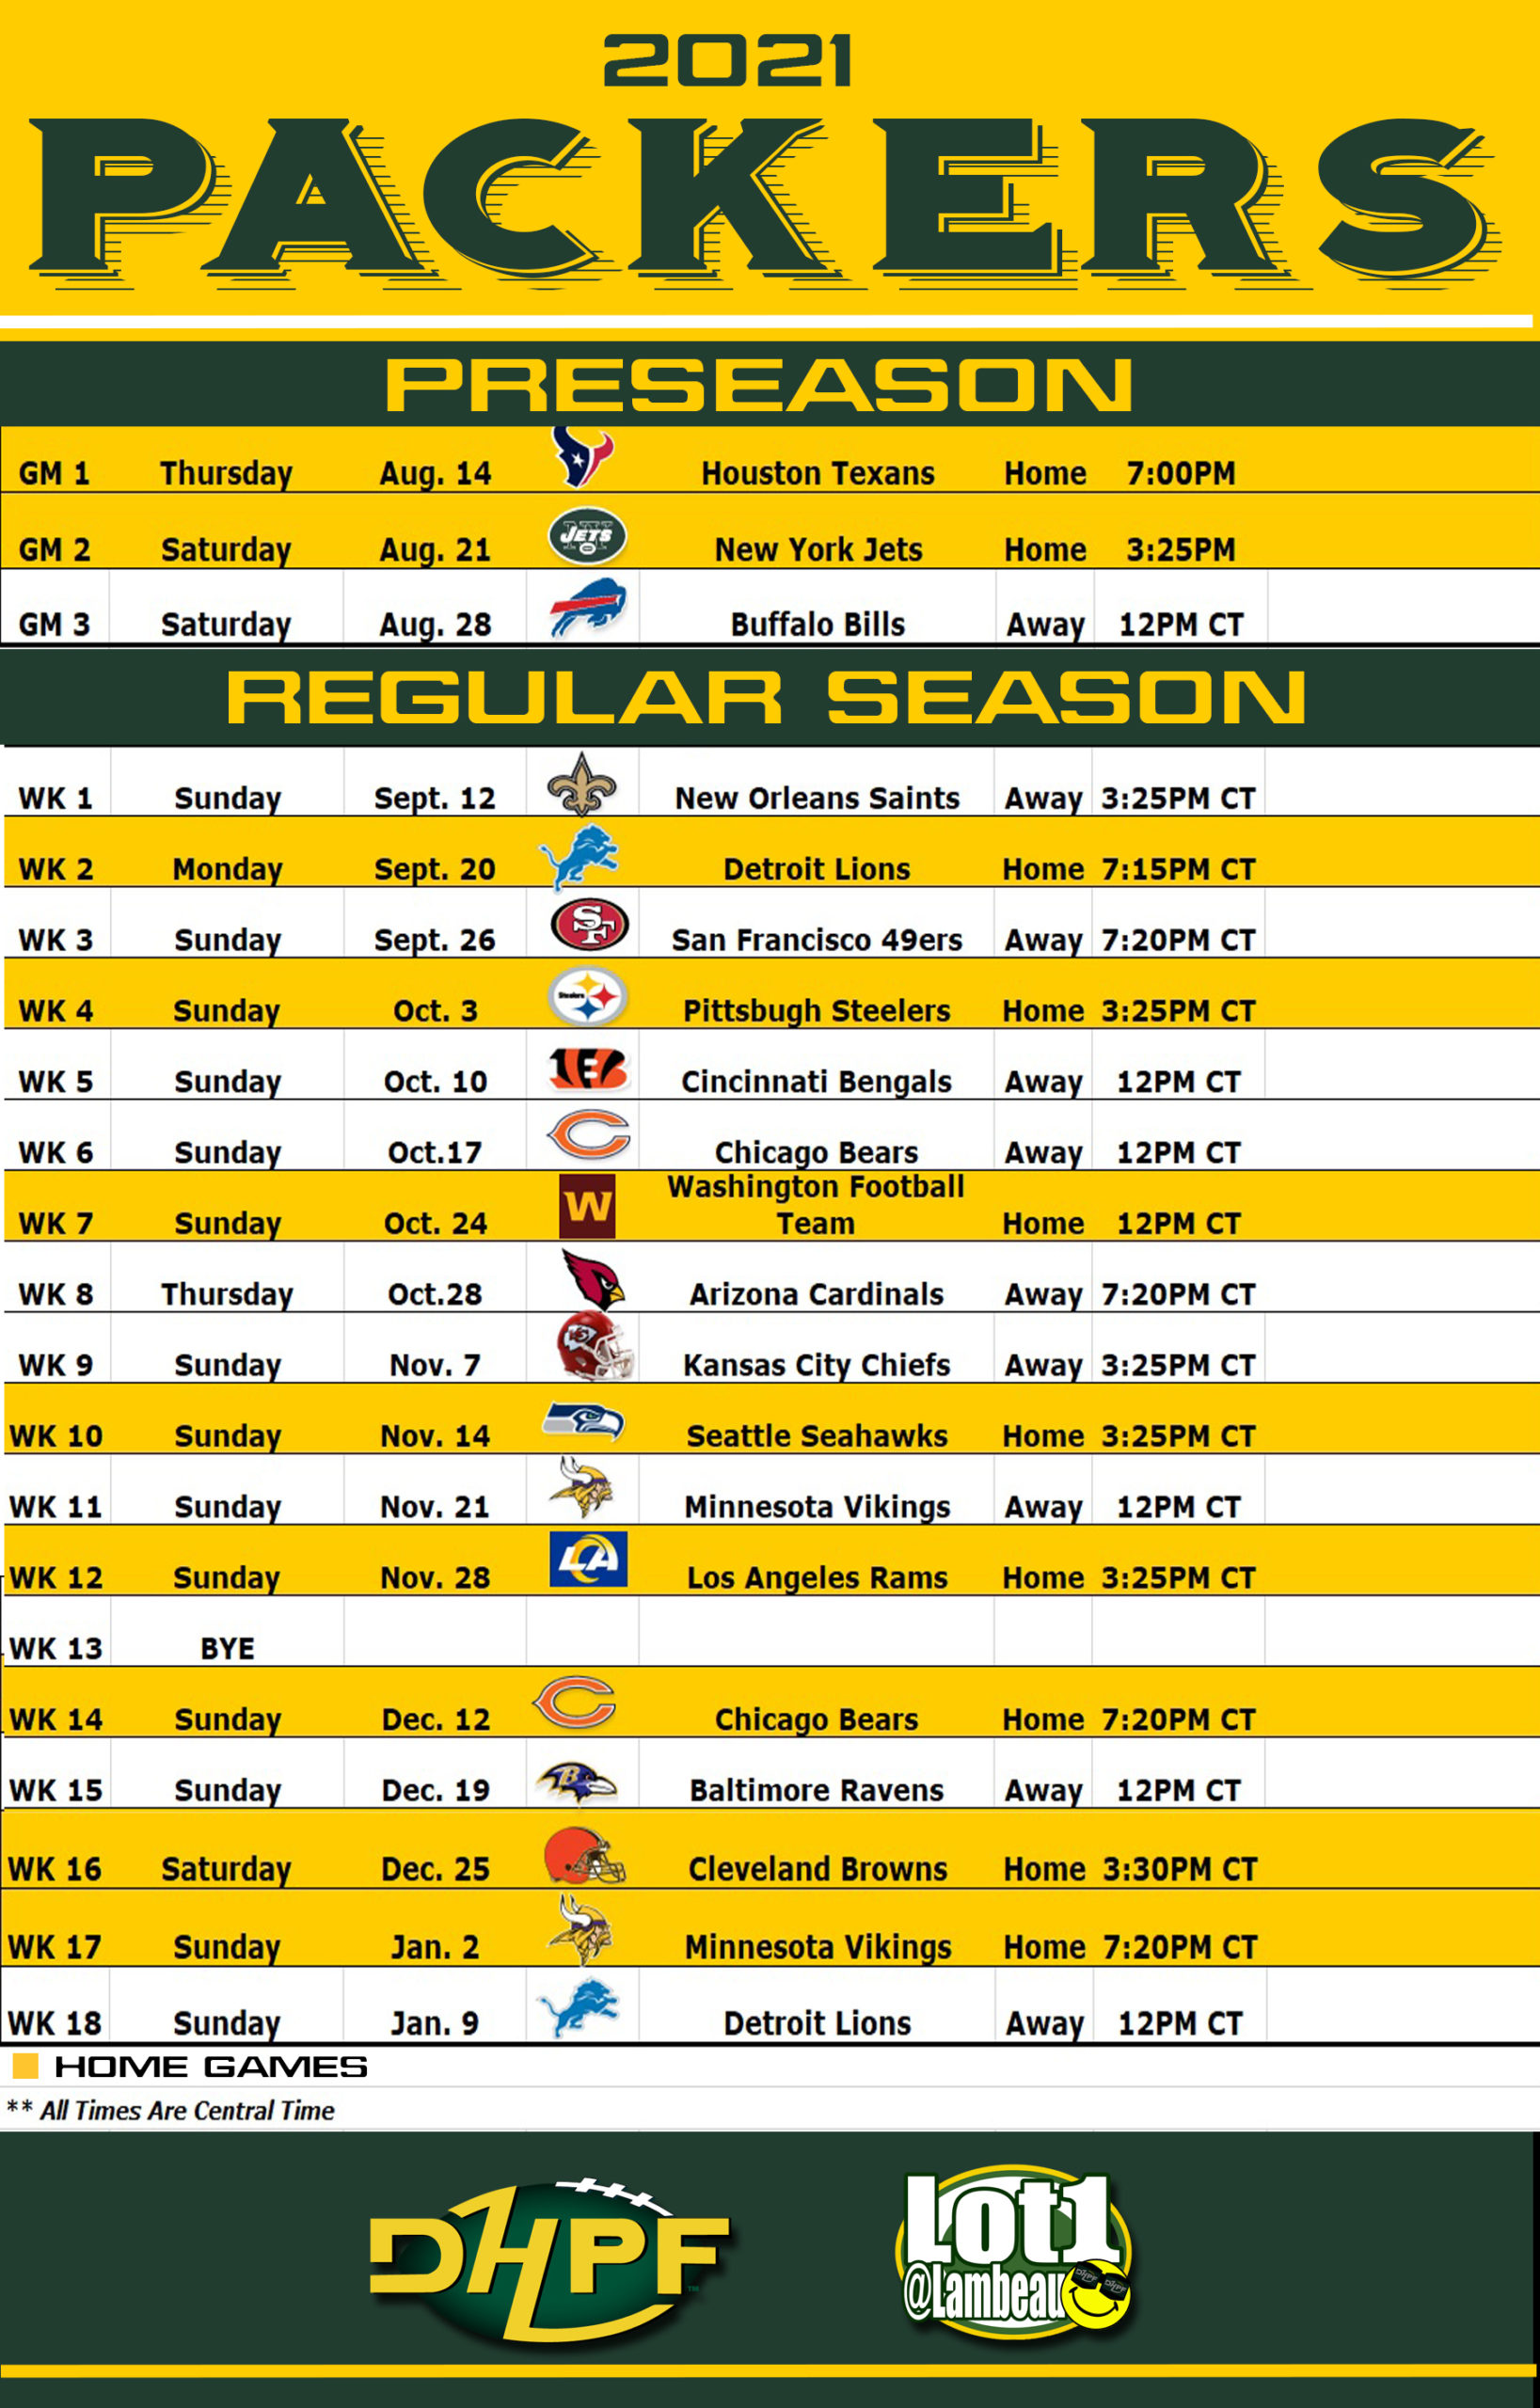 The Packers’ 2021-22 schedule and thoughts - Die Hard Packer Fan